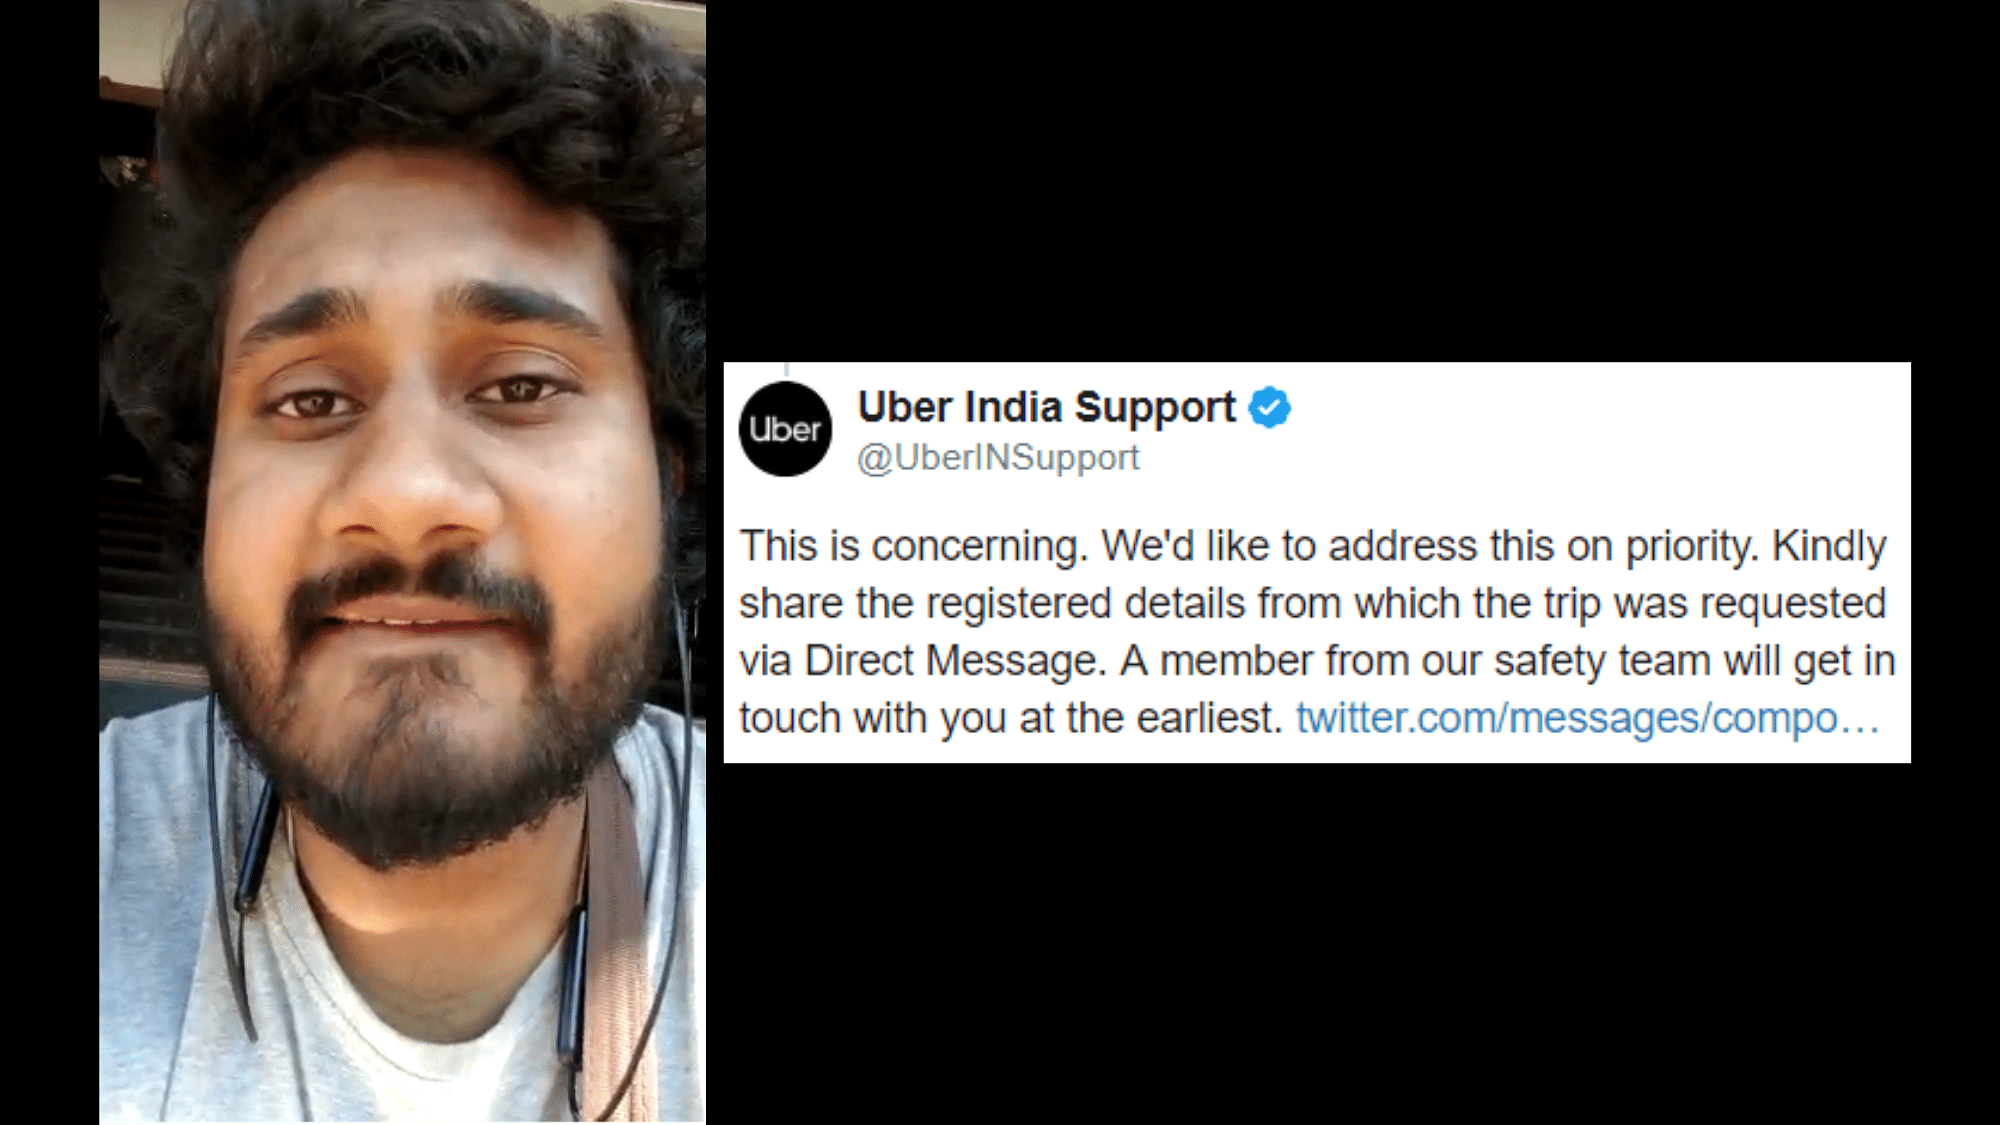 Bappadittya Sarkar was taken to a police station in Mumbai by his Uber driver, after the driver heard him talking about anti-CAA protests over the phone.